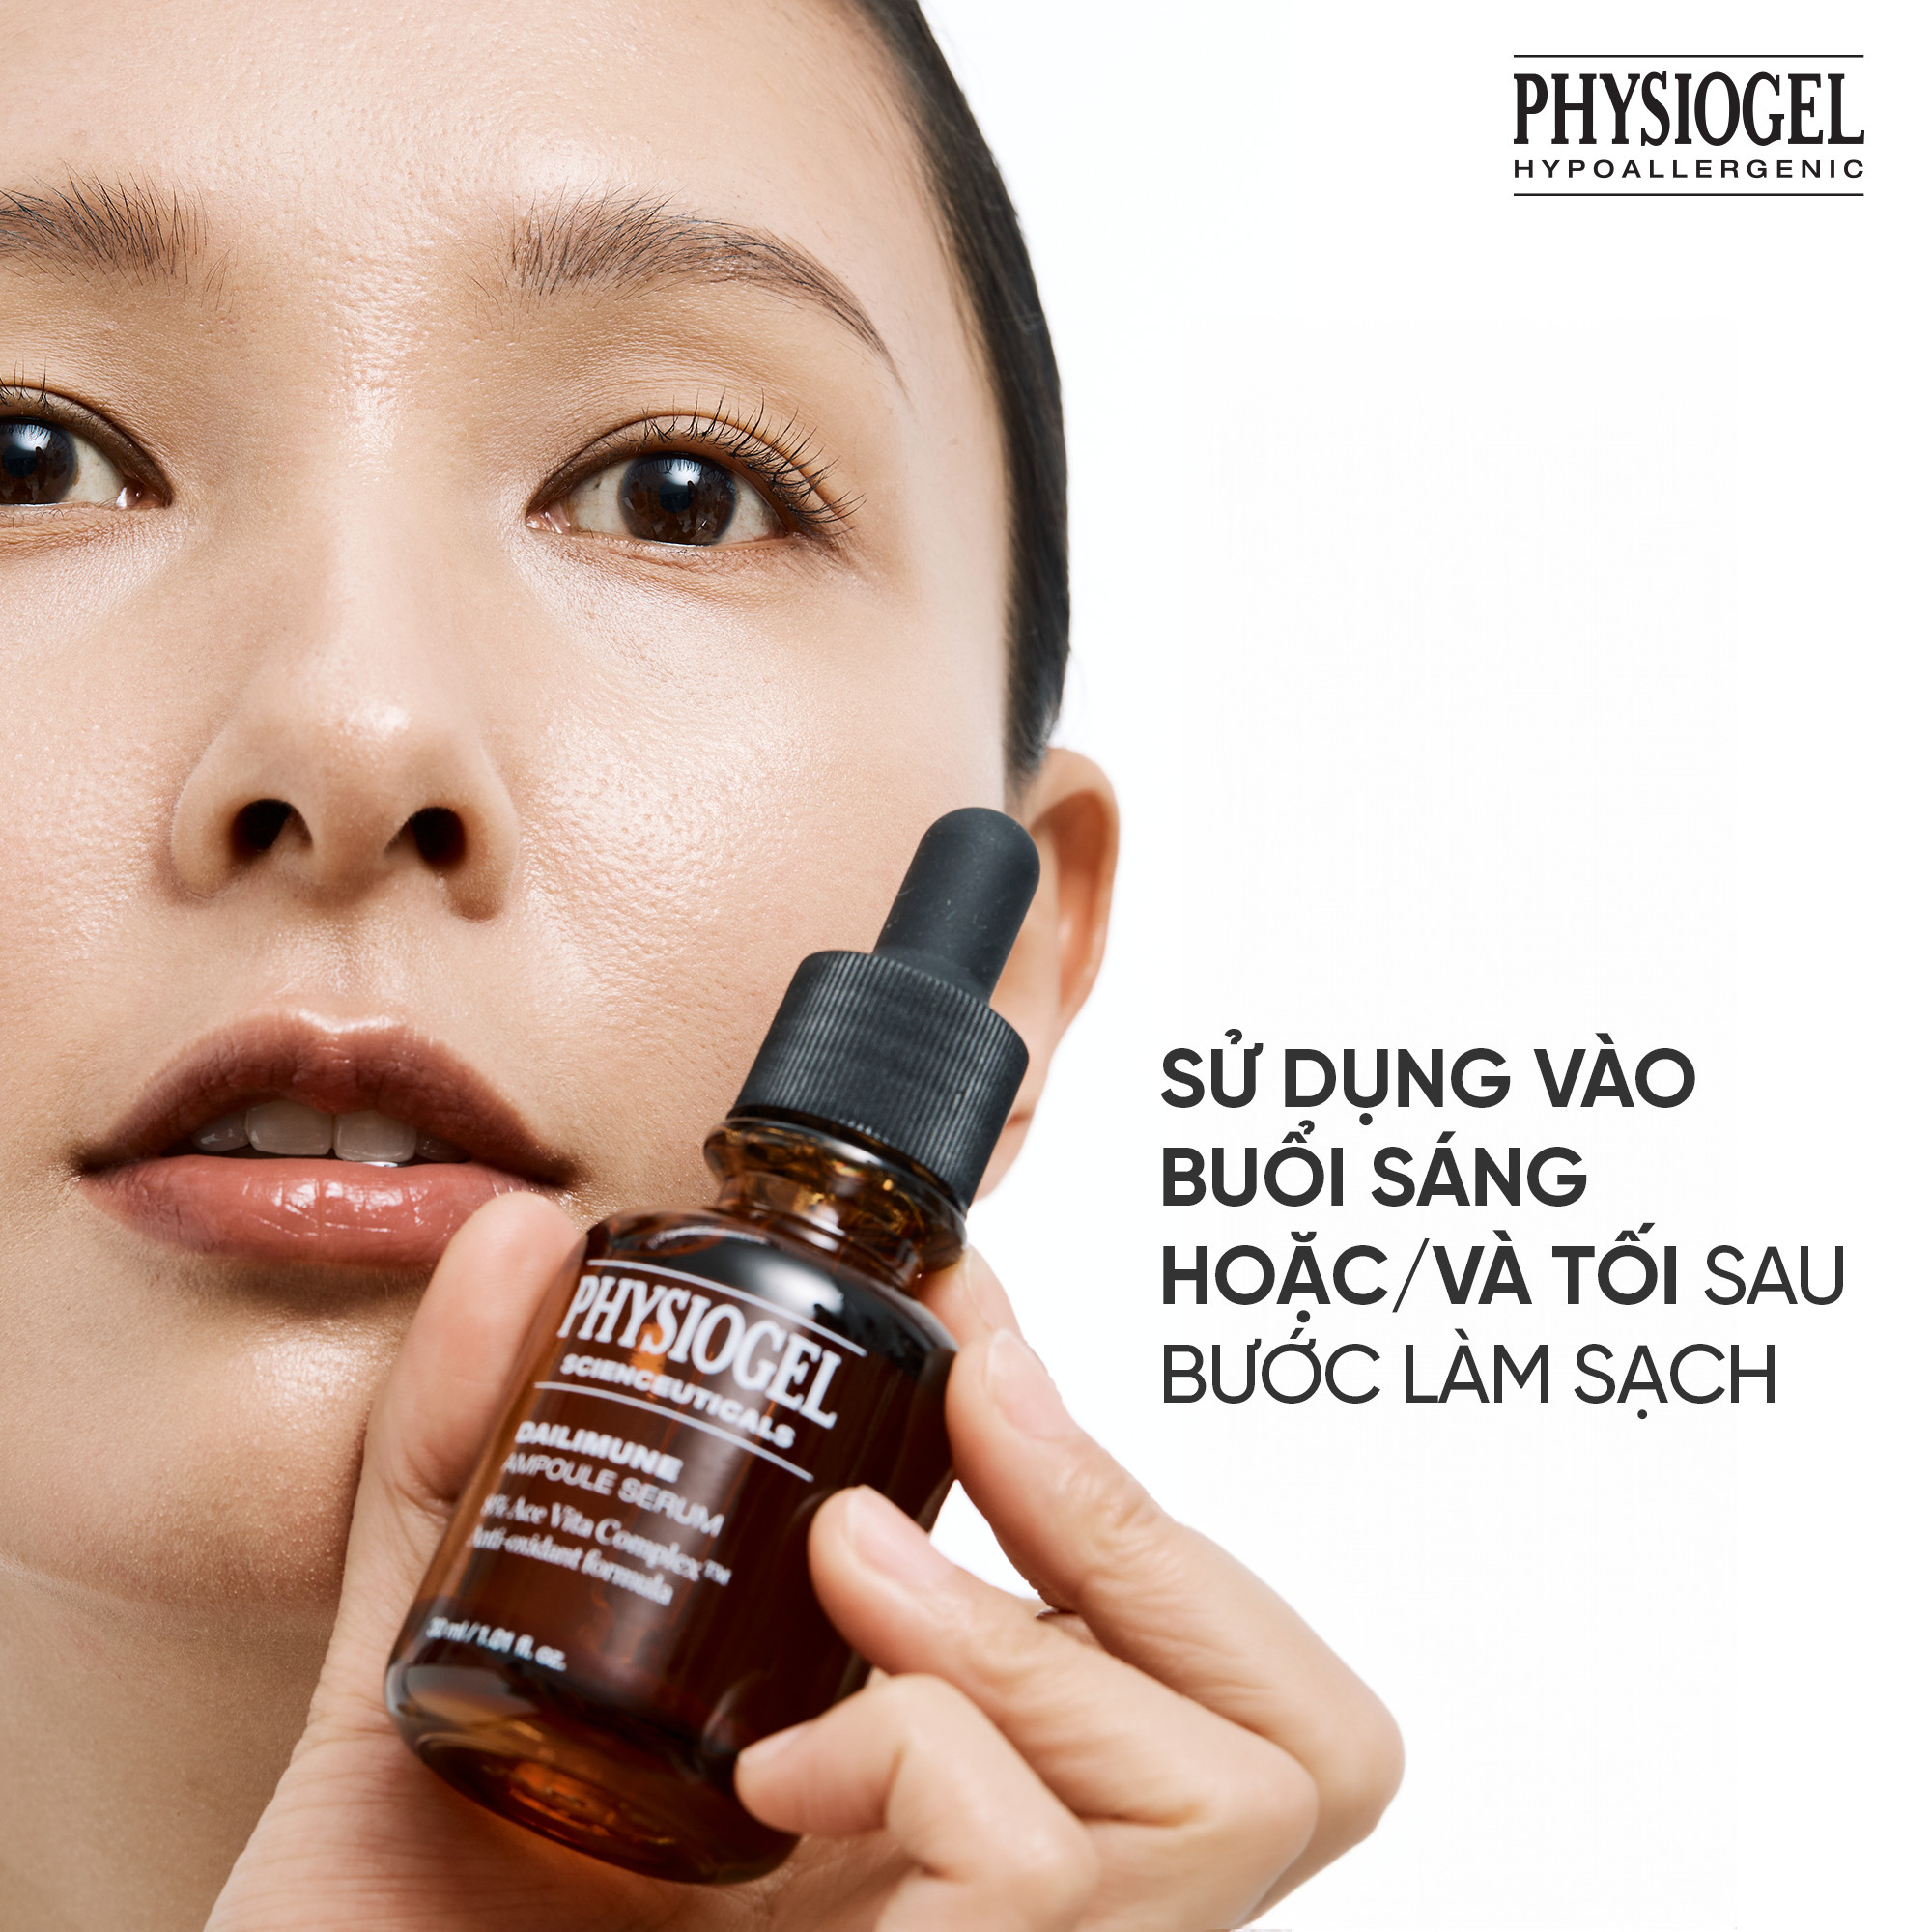 Tinh chất dưỡng trắng chống Oxy hóa Physiogel Scienceuticals Dailimune Ampoule Serum 10ml